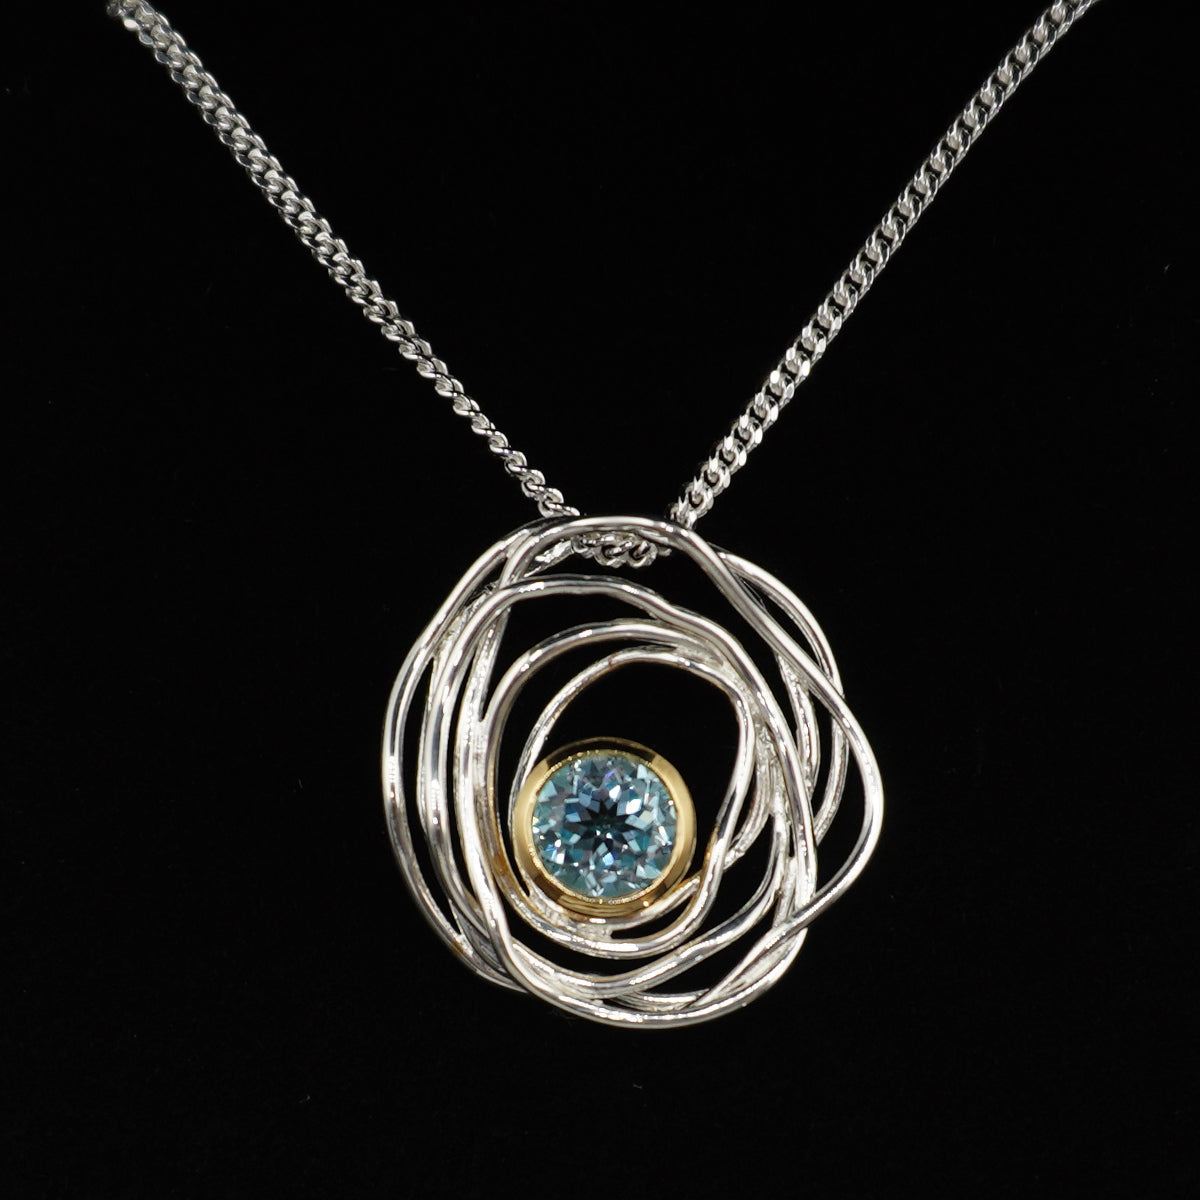 Silver and Topaz Pendant